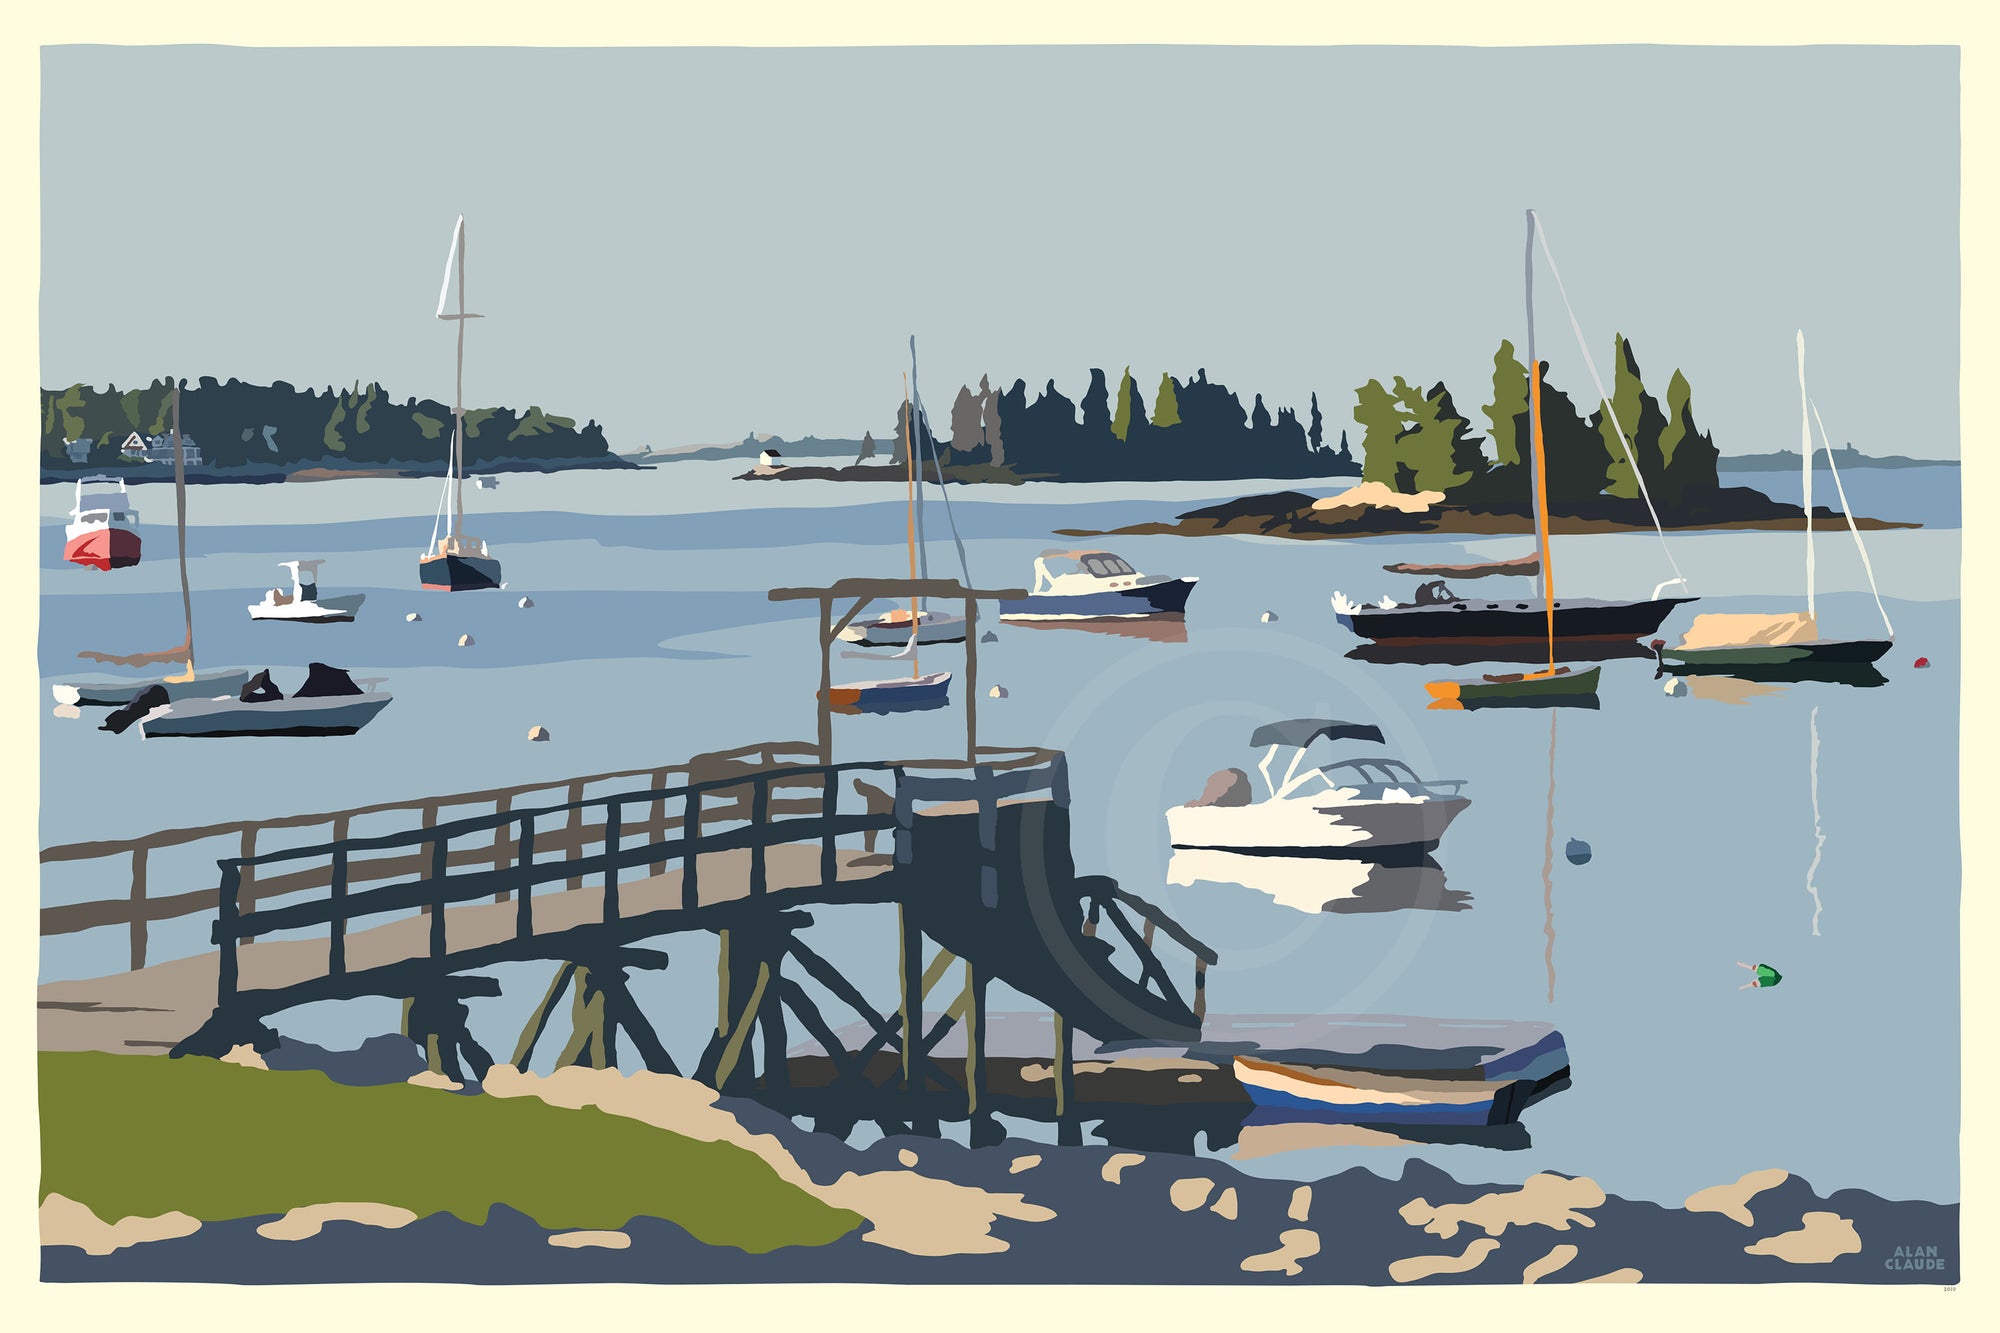 Sailboats in Boothbay Harbor Art Print 36" x 53" Wall Poster By Alan Claude - Maine